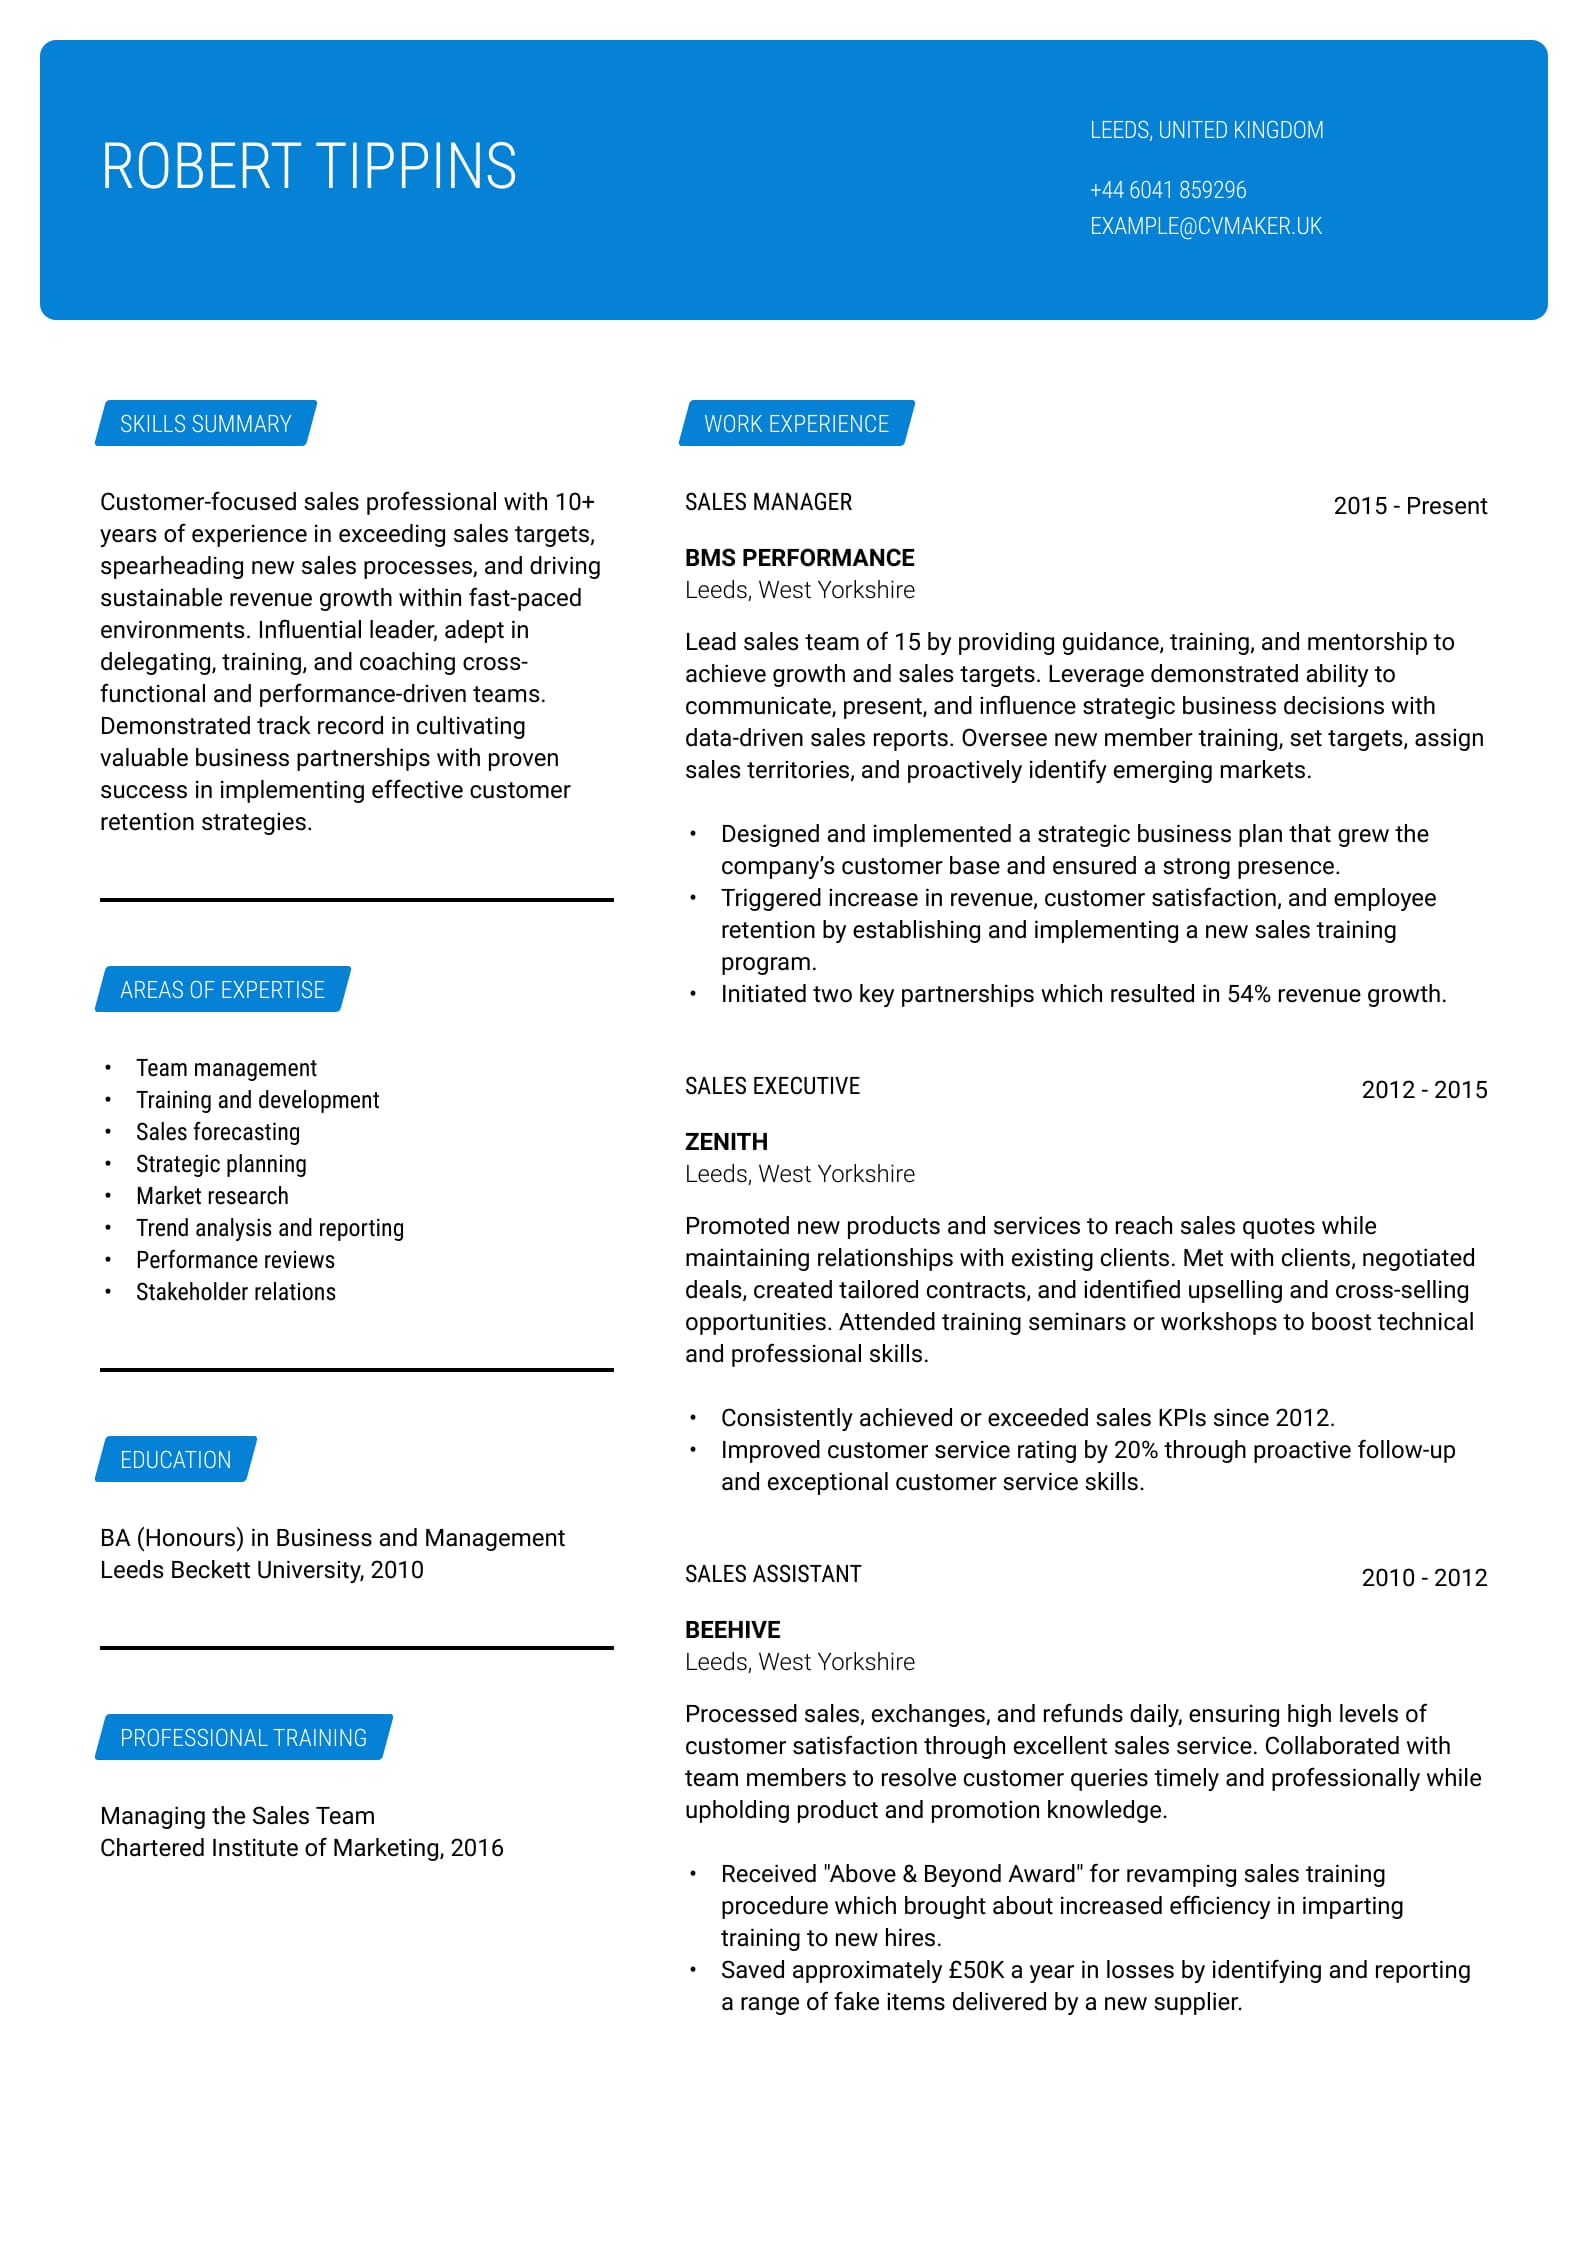 Sales Manager CV example